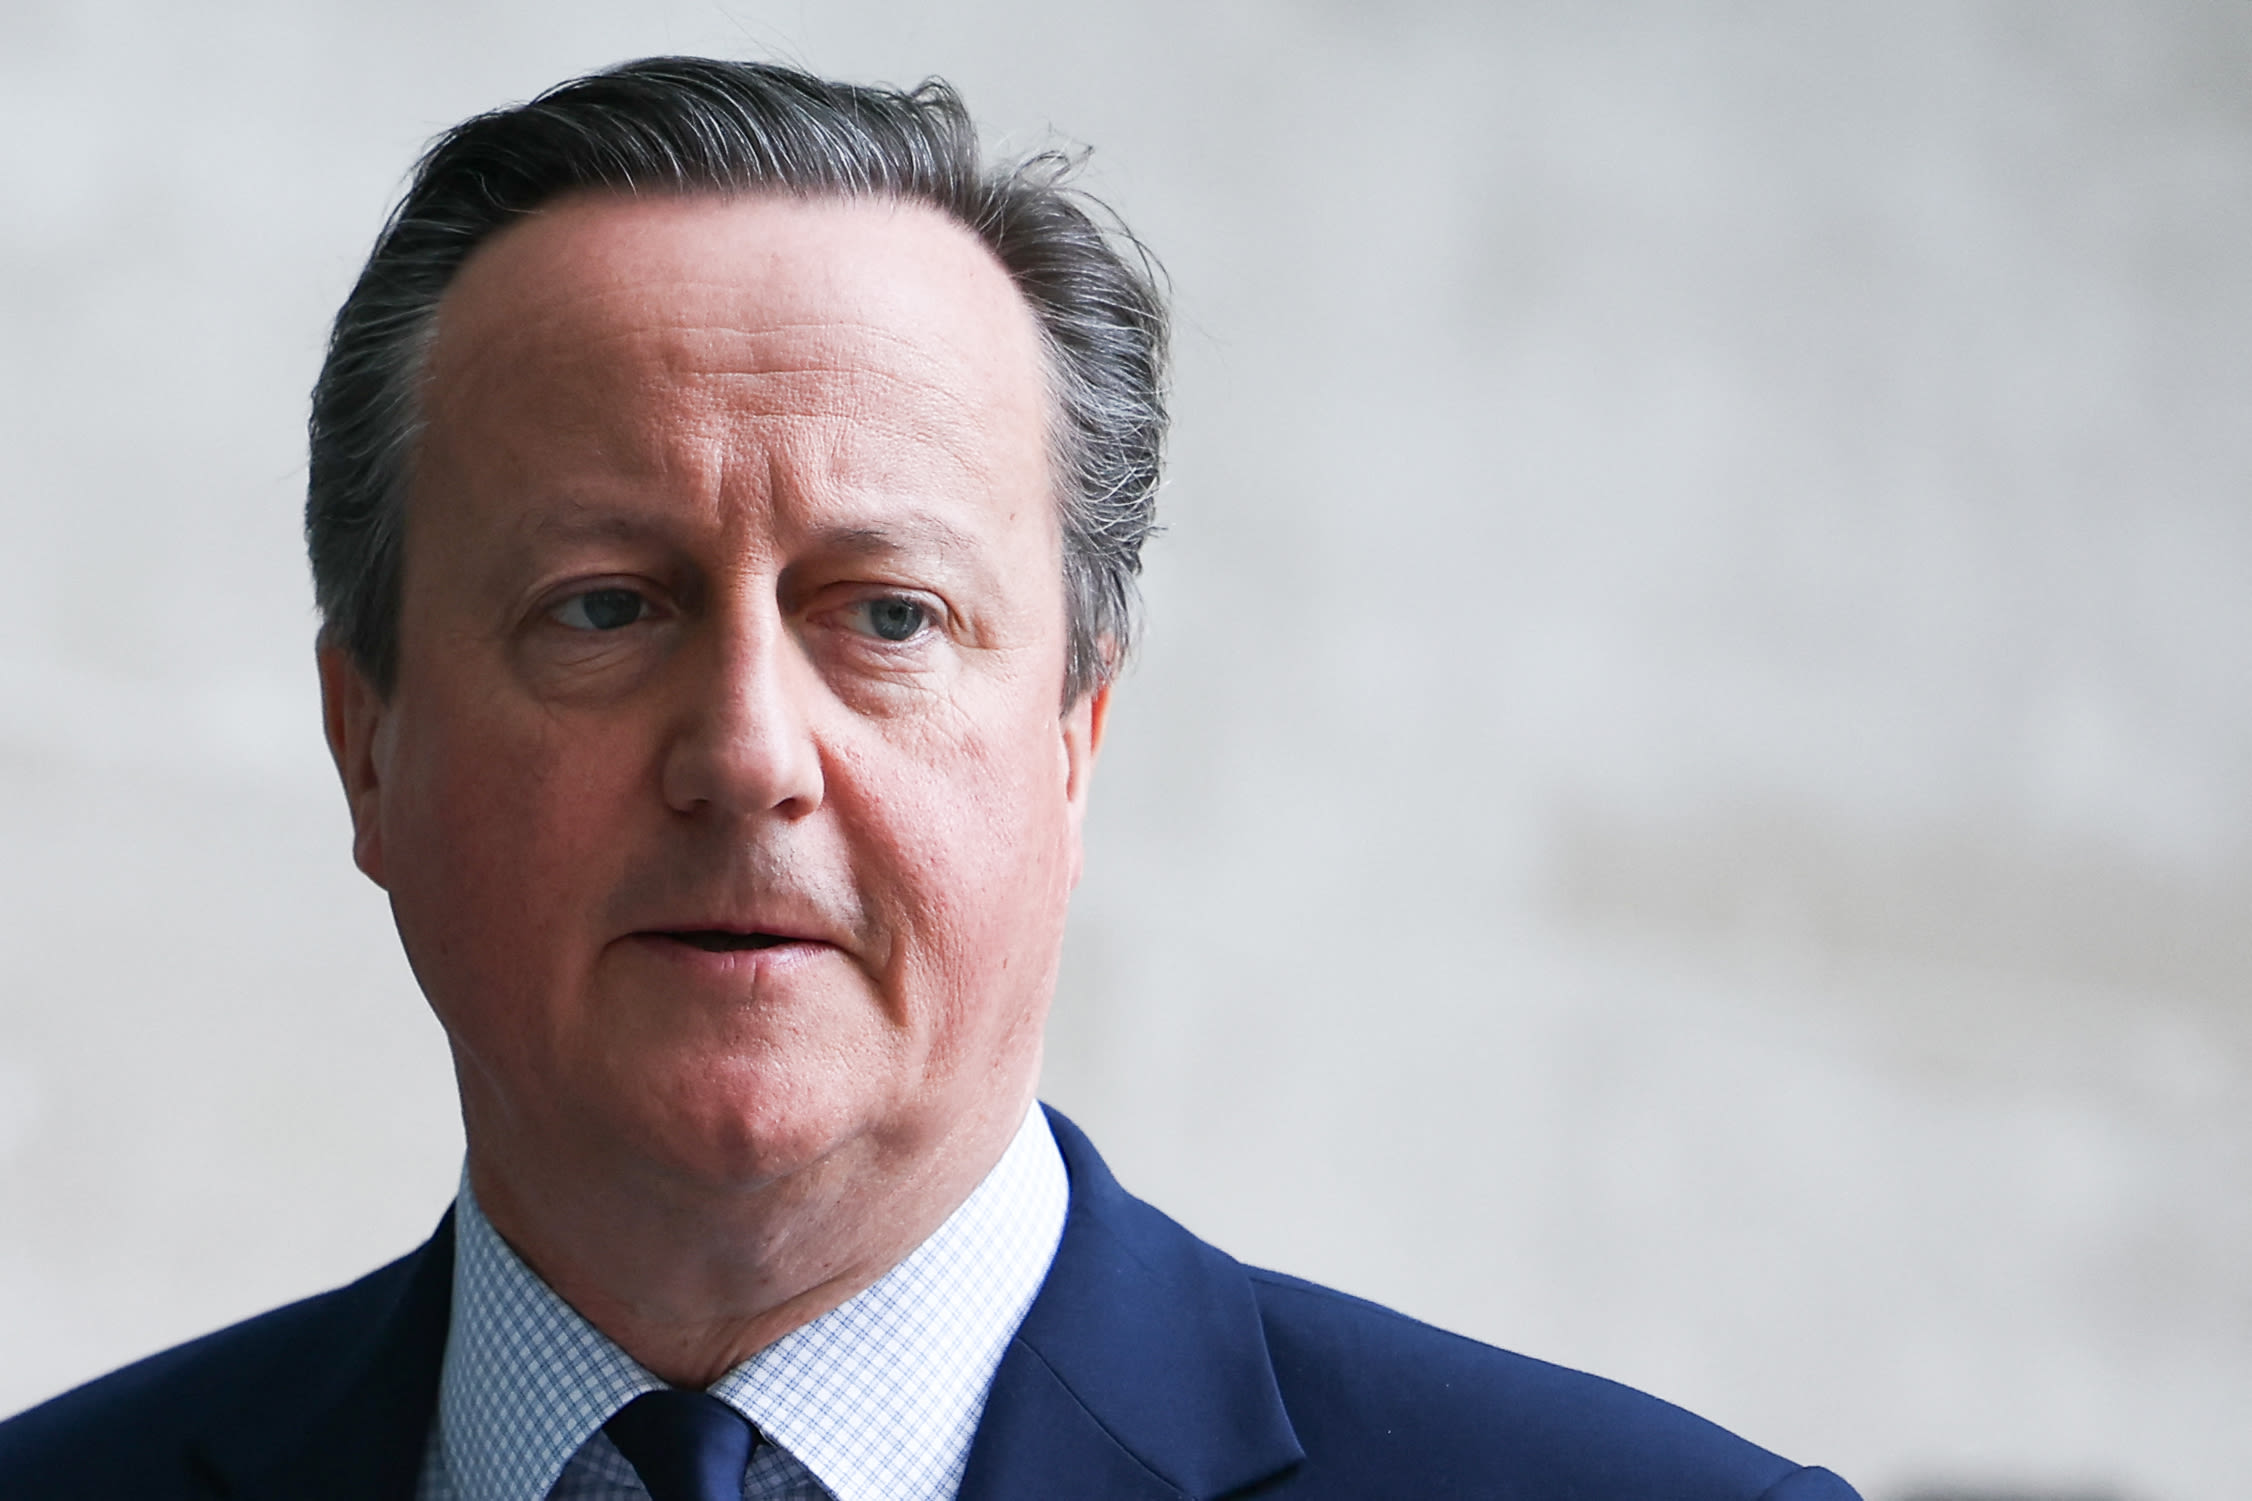 David Cameron rules out putting British boots on the ground in Gaza to deliver aid